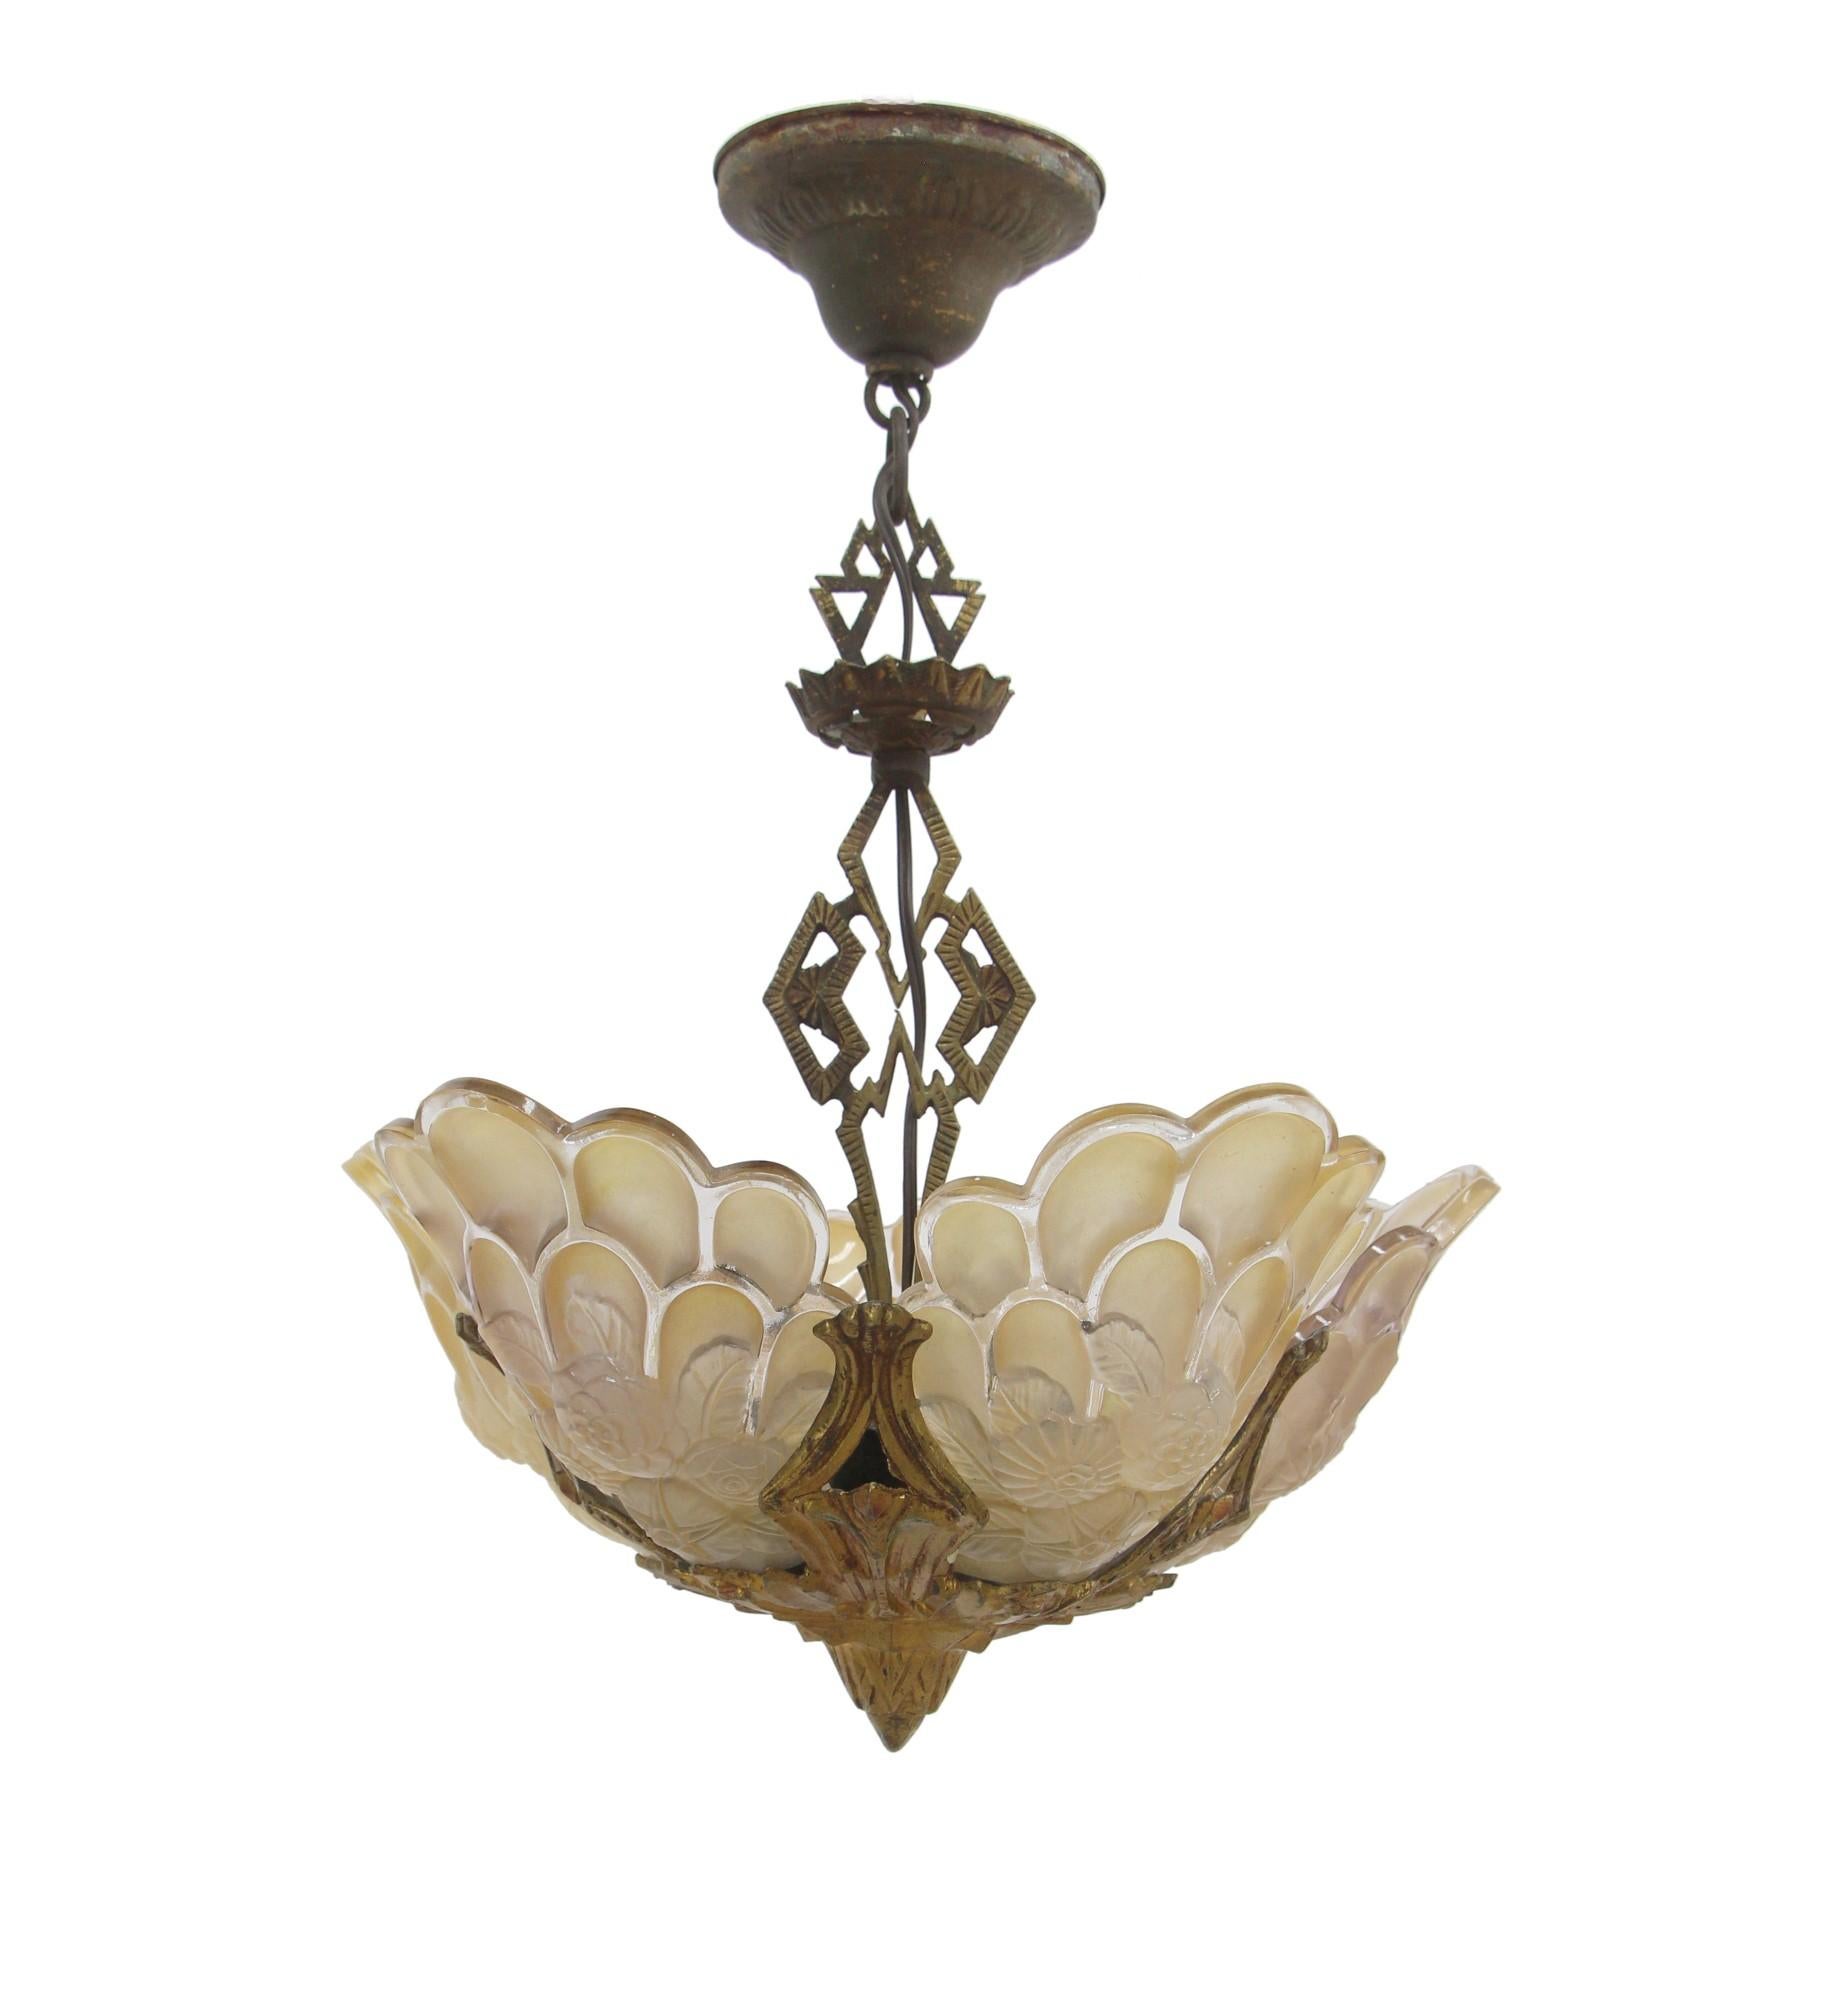 Art Deco slip shade pendant chandelier with frosted floral tan slip shades from the 1930s. This can be seen at our 400 Gilligan St location in Scranton, PA.